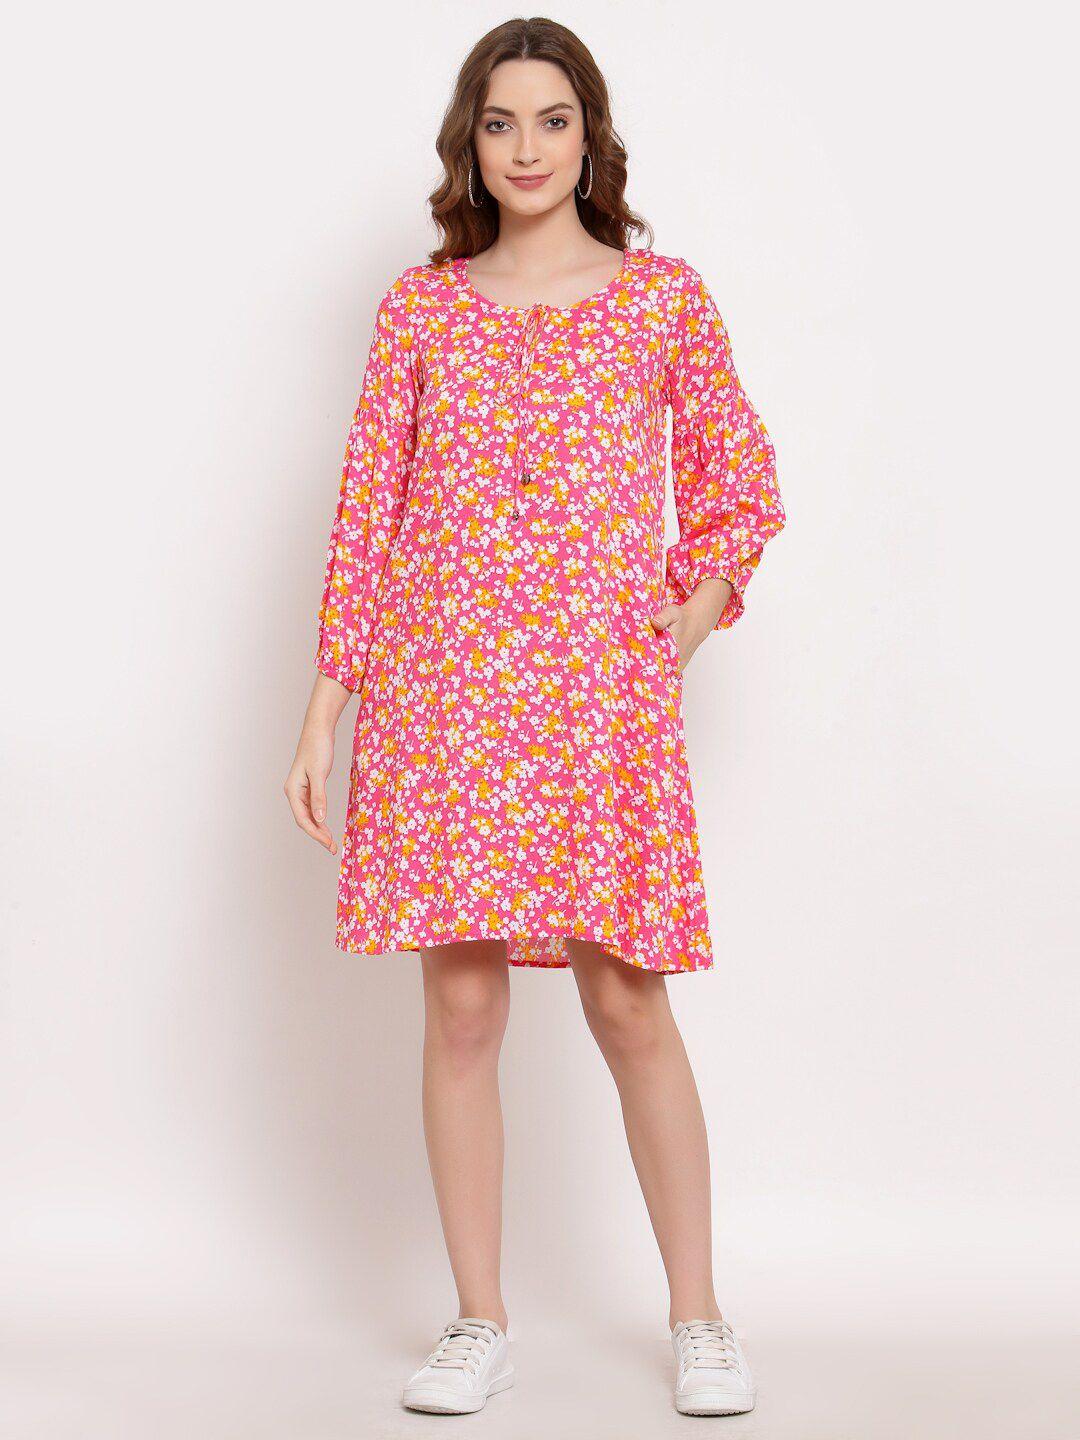 terquois-pink-floral-a-line-dress